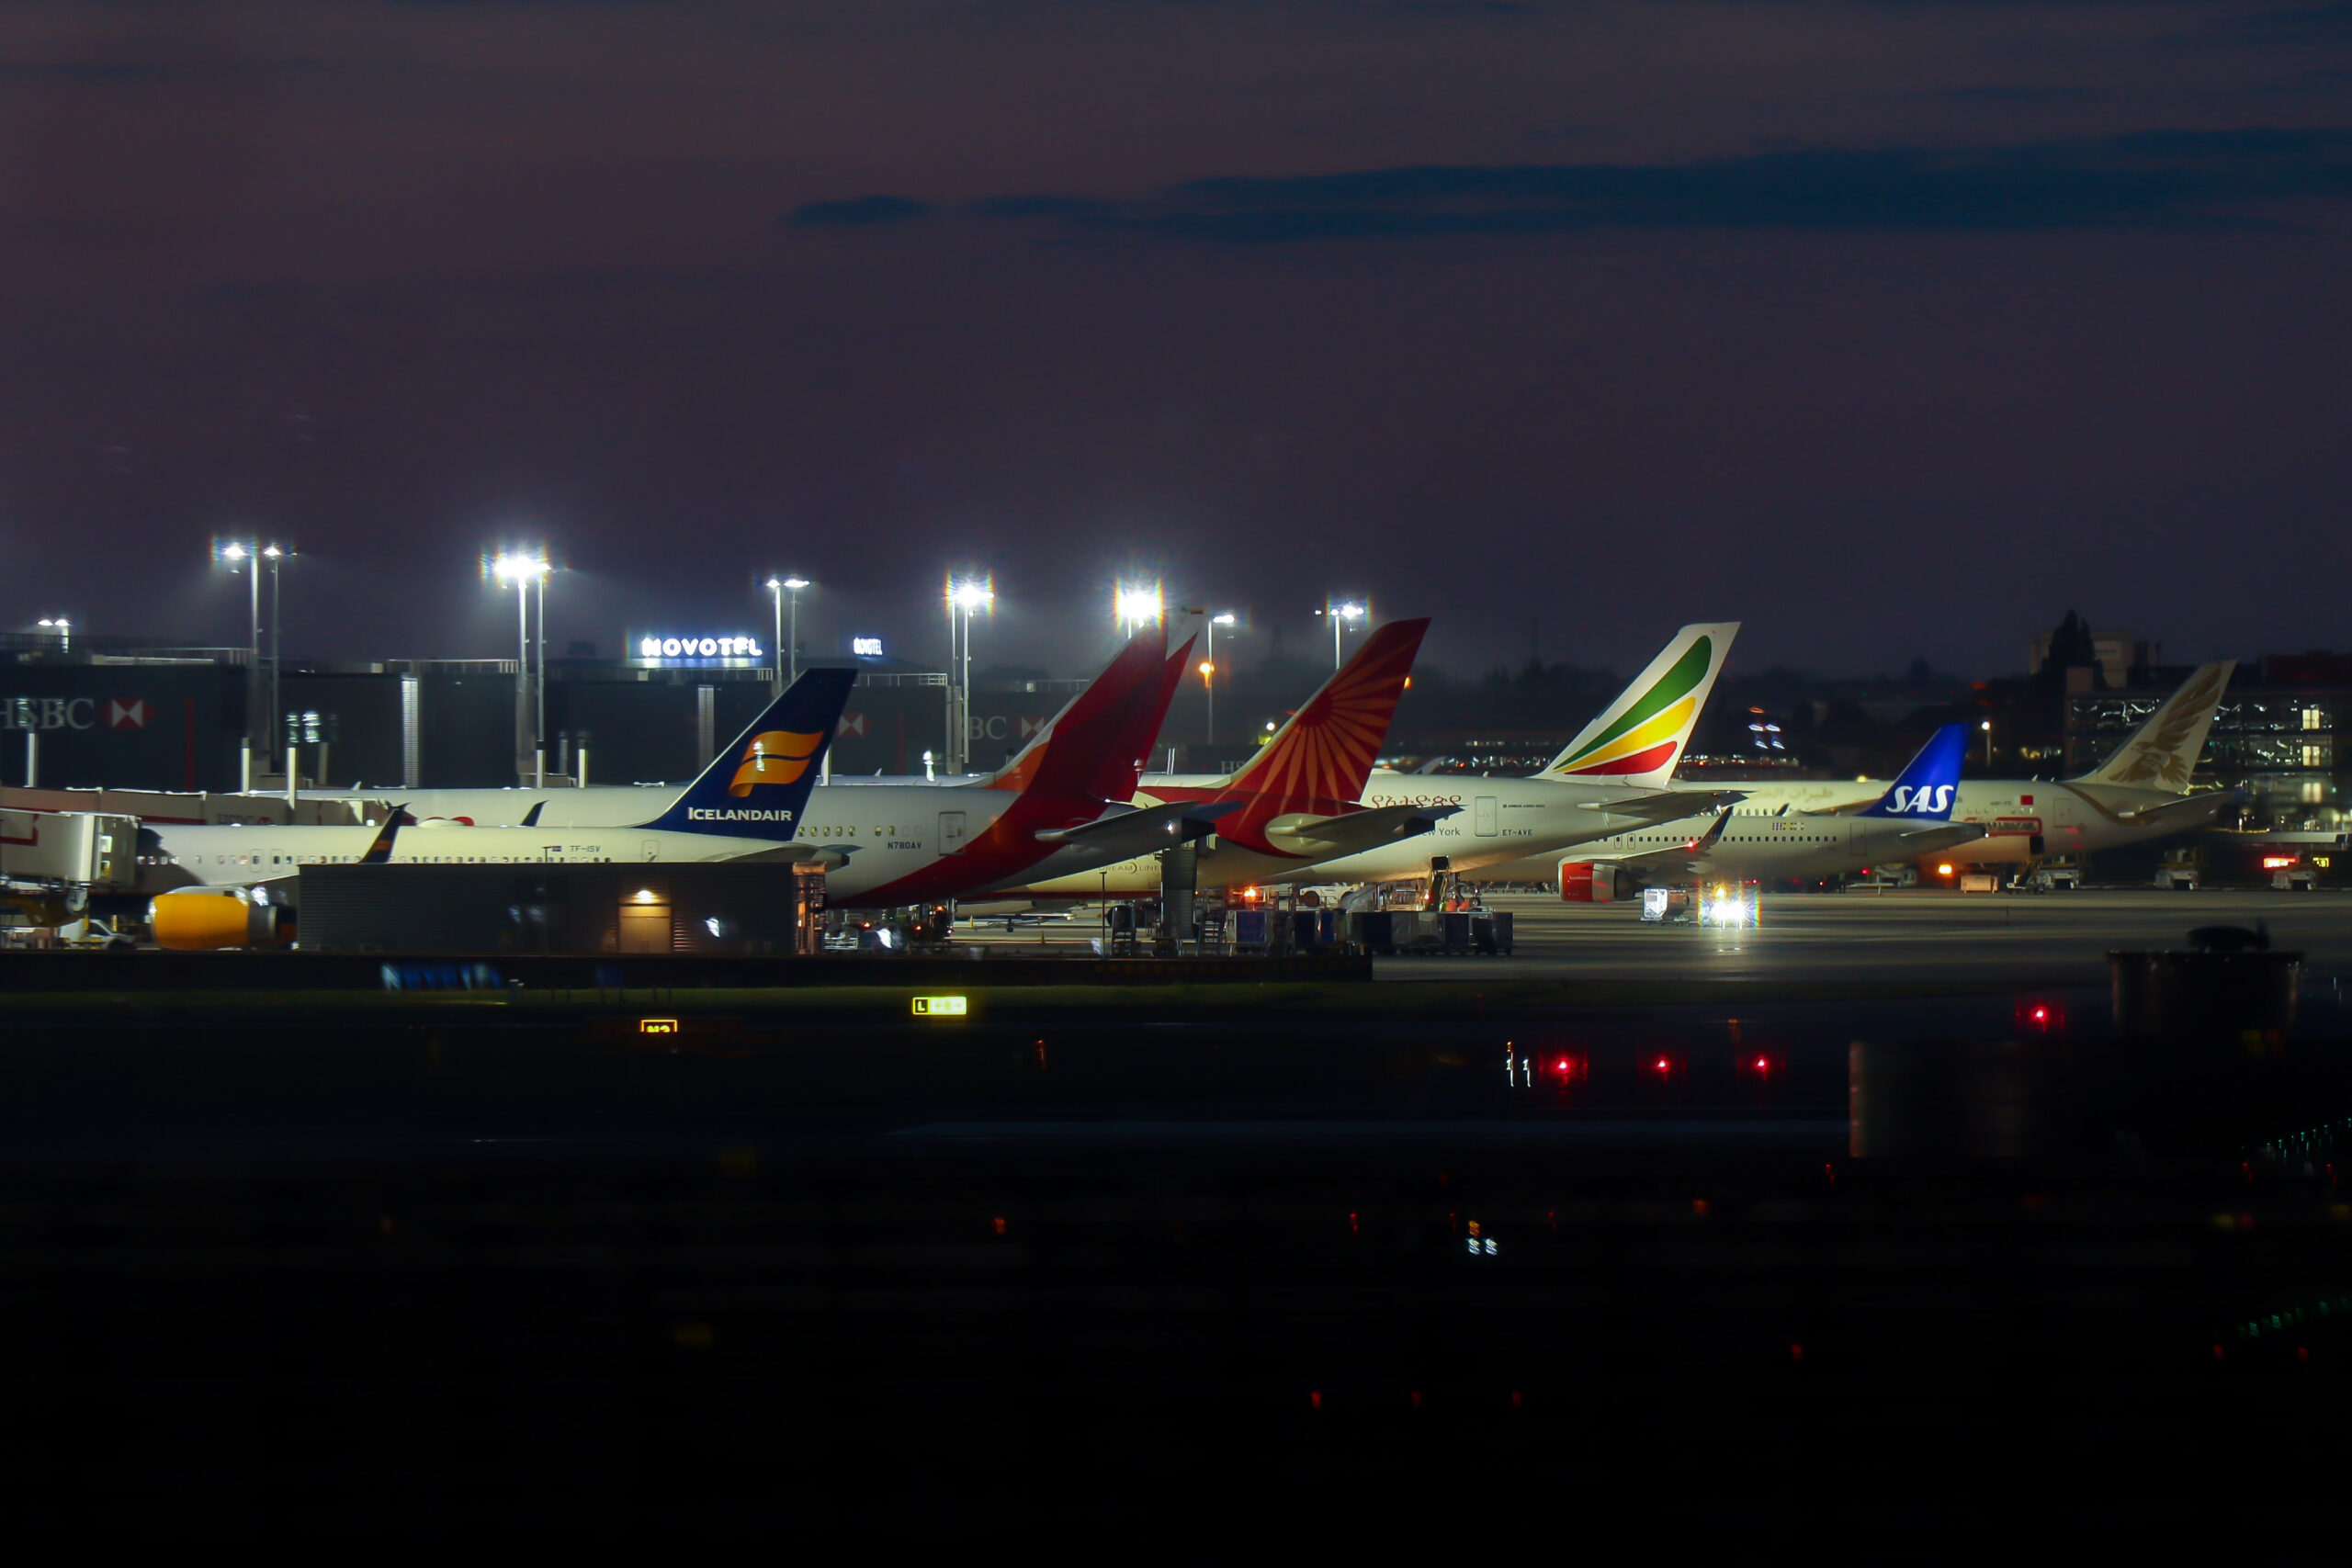 A line of parked aircraft at night.